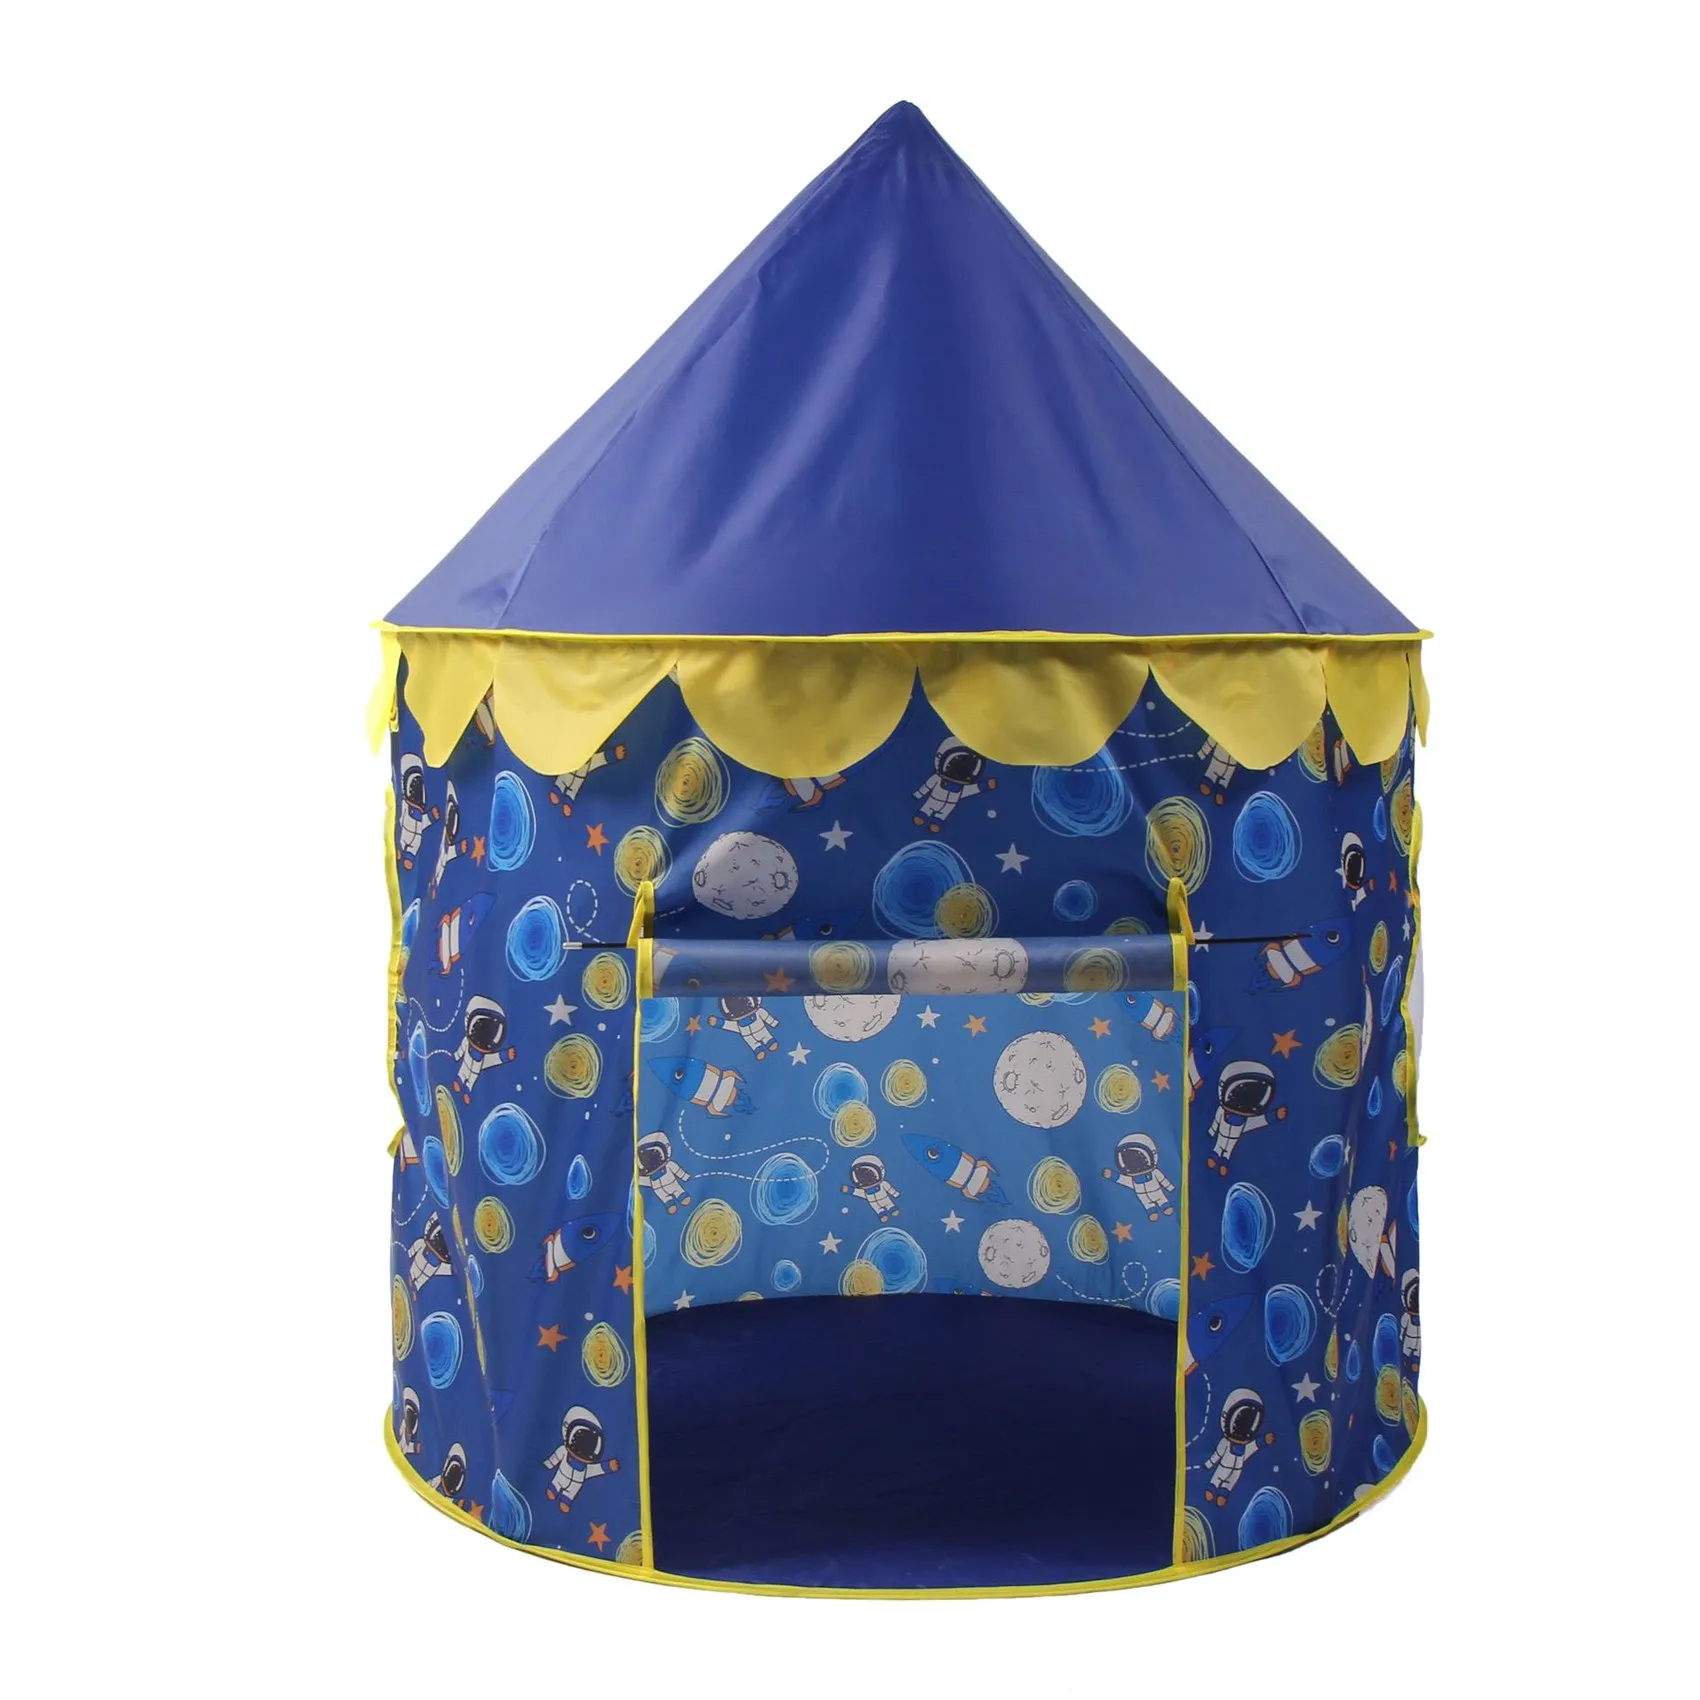 

Baby Children Castle Playhouse Indoor Outdoor Home Bedroom Hut Toy Portable Ball Pool Game House Kids Play Tent Blue